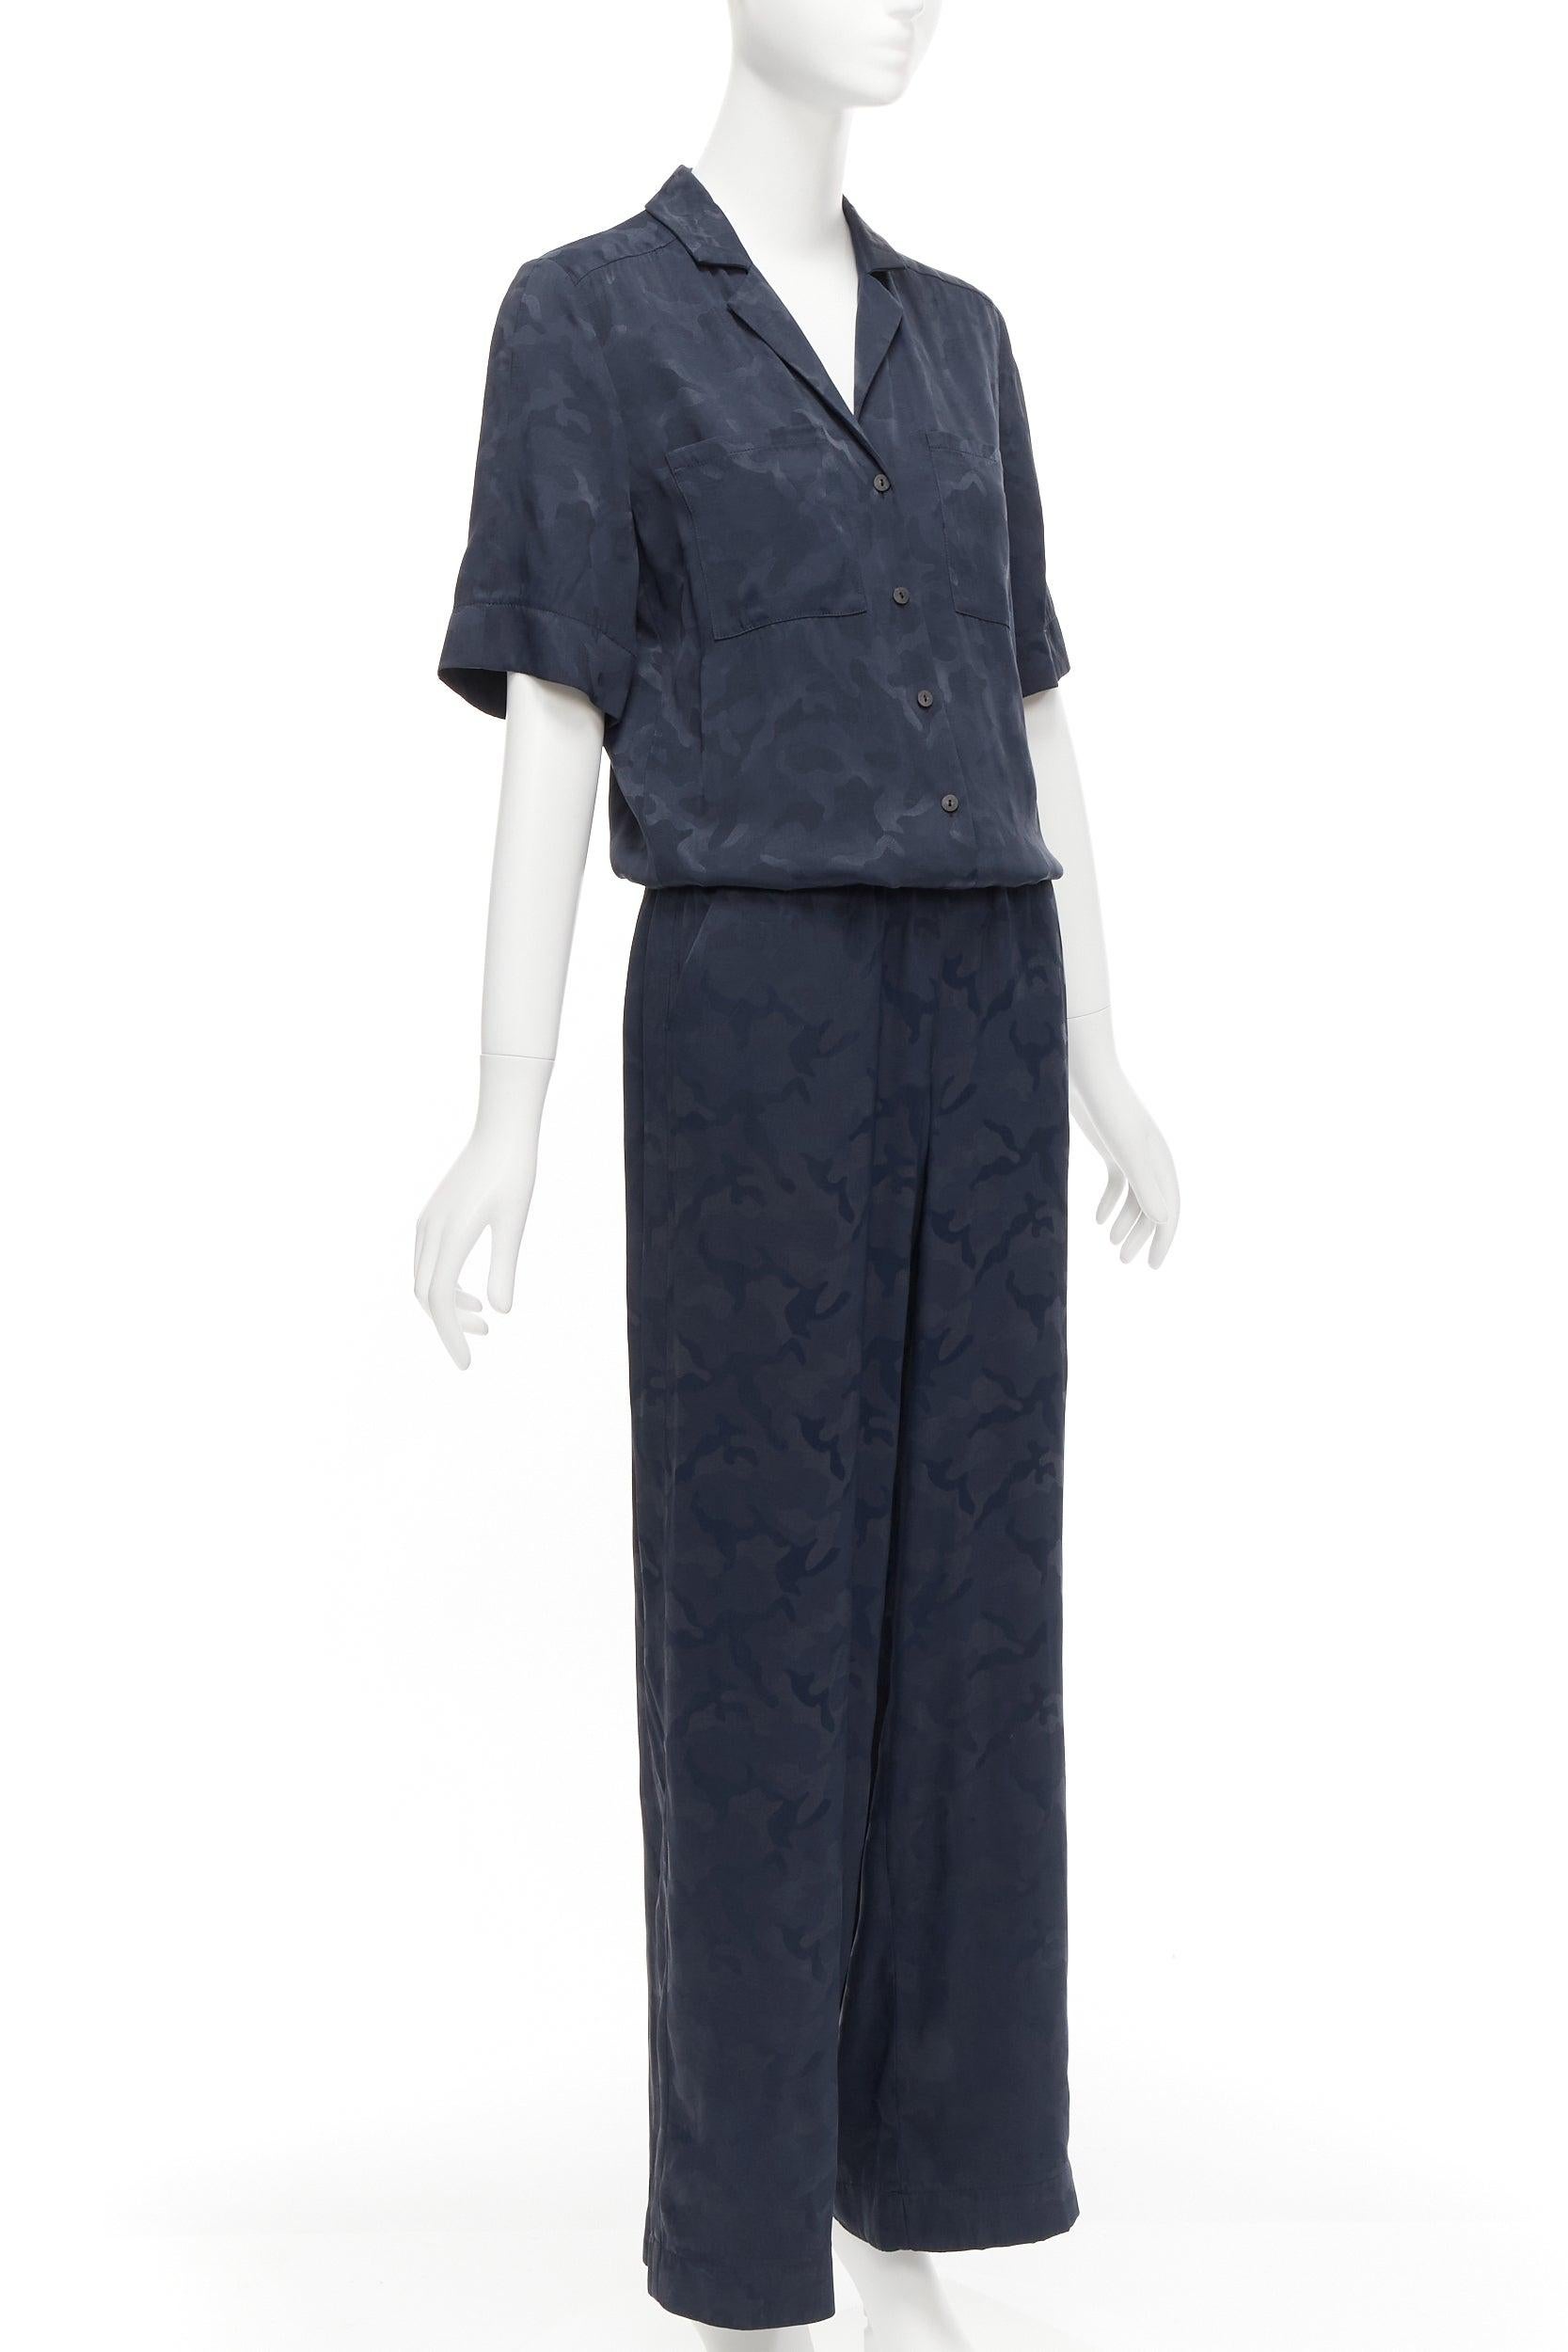 CEFINN Spencer navy camouflage jacquard satin cropped wide jumpsuit UK6 XS
Reference: CELG/A00379
Brand: Cefinn
Model: Spencer
Material: Satin
Color: Navy
Pattern: Camouflage
Closure: Button
Extra Details: 'Spencer' jumpsuit is made from breezy